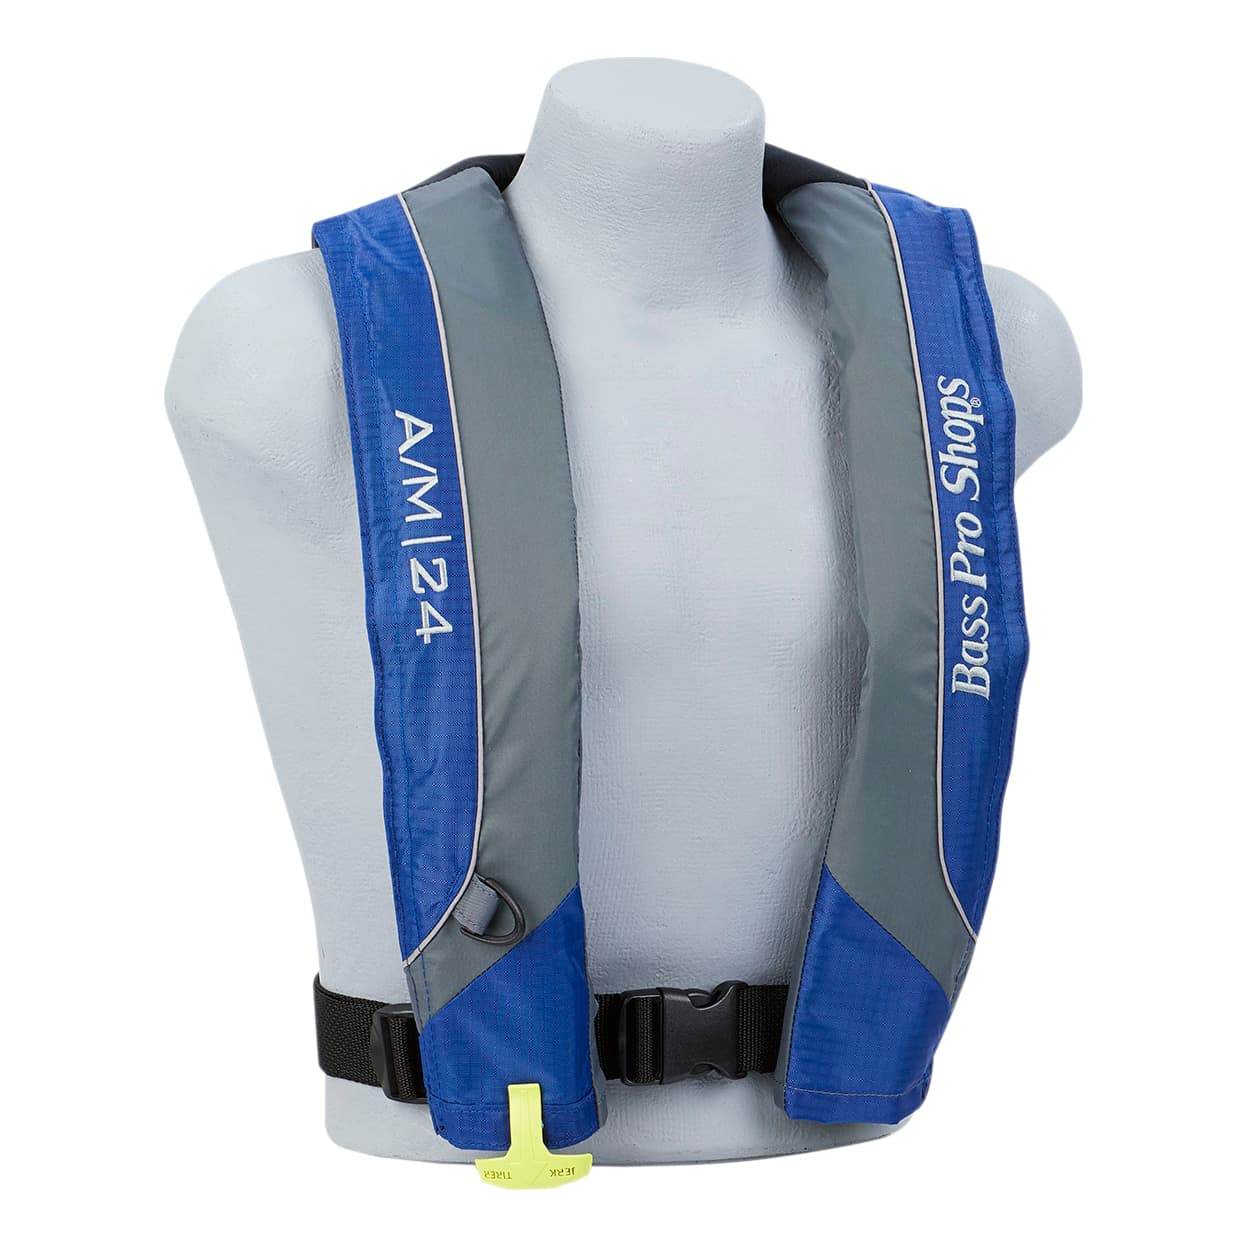 Inflatable Fly Fishing PFD Vest